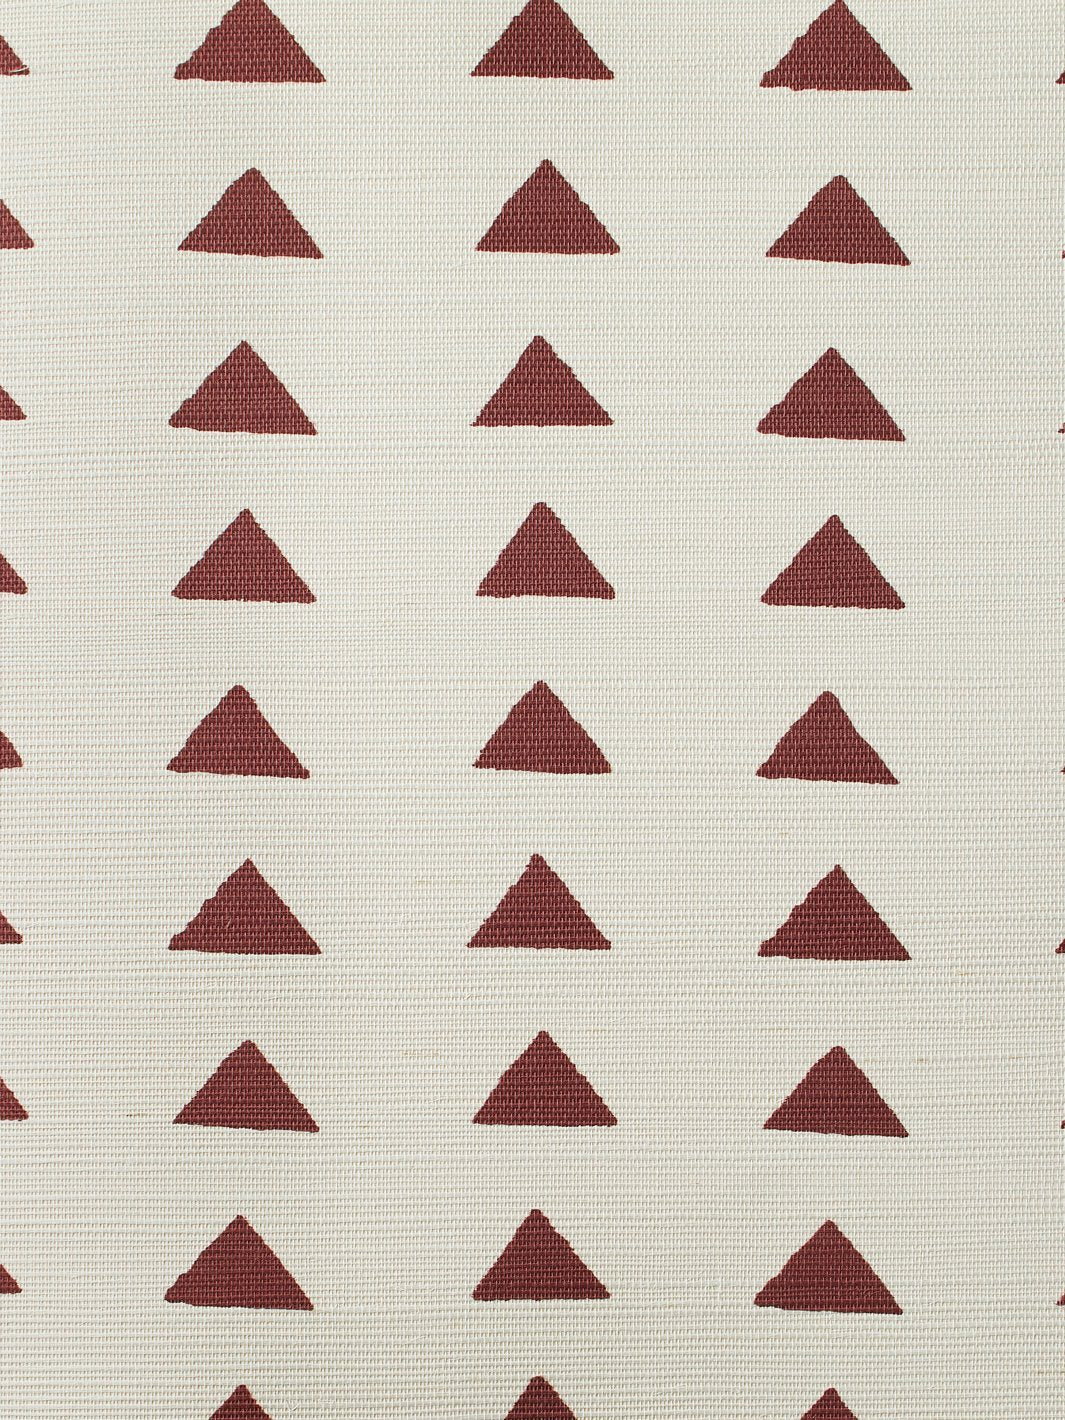 'Triangles' Grasscloth' Wallpaper by Nathan Turner - Rust